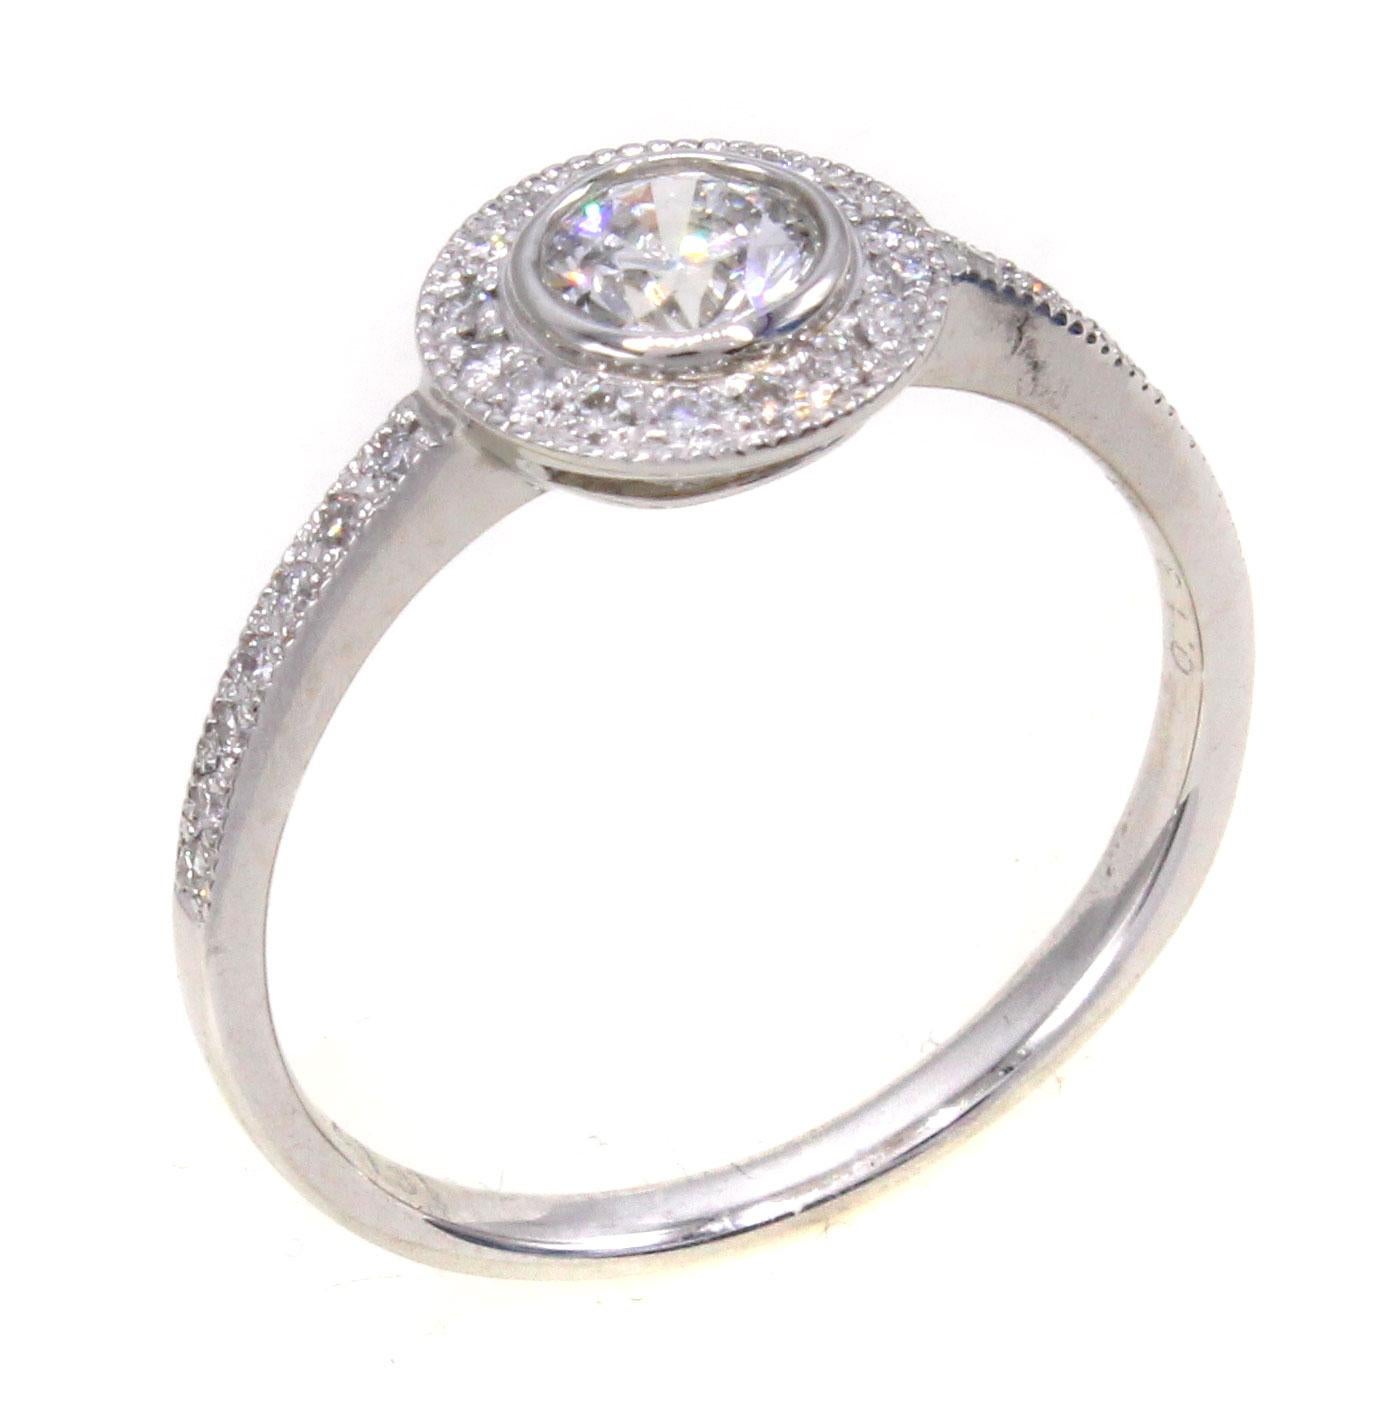 Beautifully designed and masterfully handcrafted in platinum, this perfect engagement ring features a centrally bezel set round brilliant cut diamond weighing 0.41 carats. Surrounding this diamond is a halo of bright white round brilliant cut